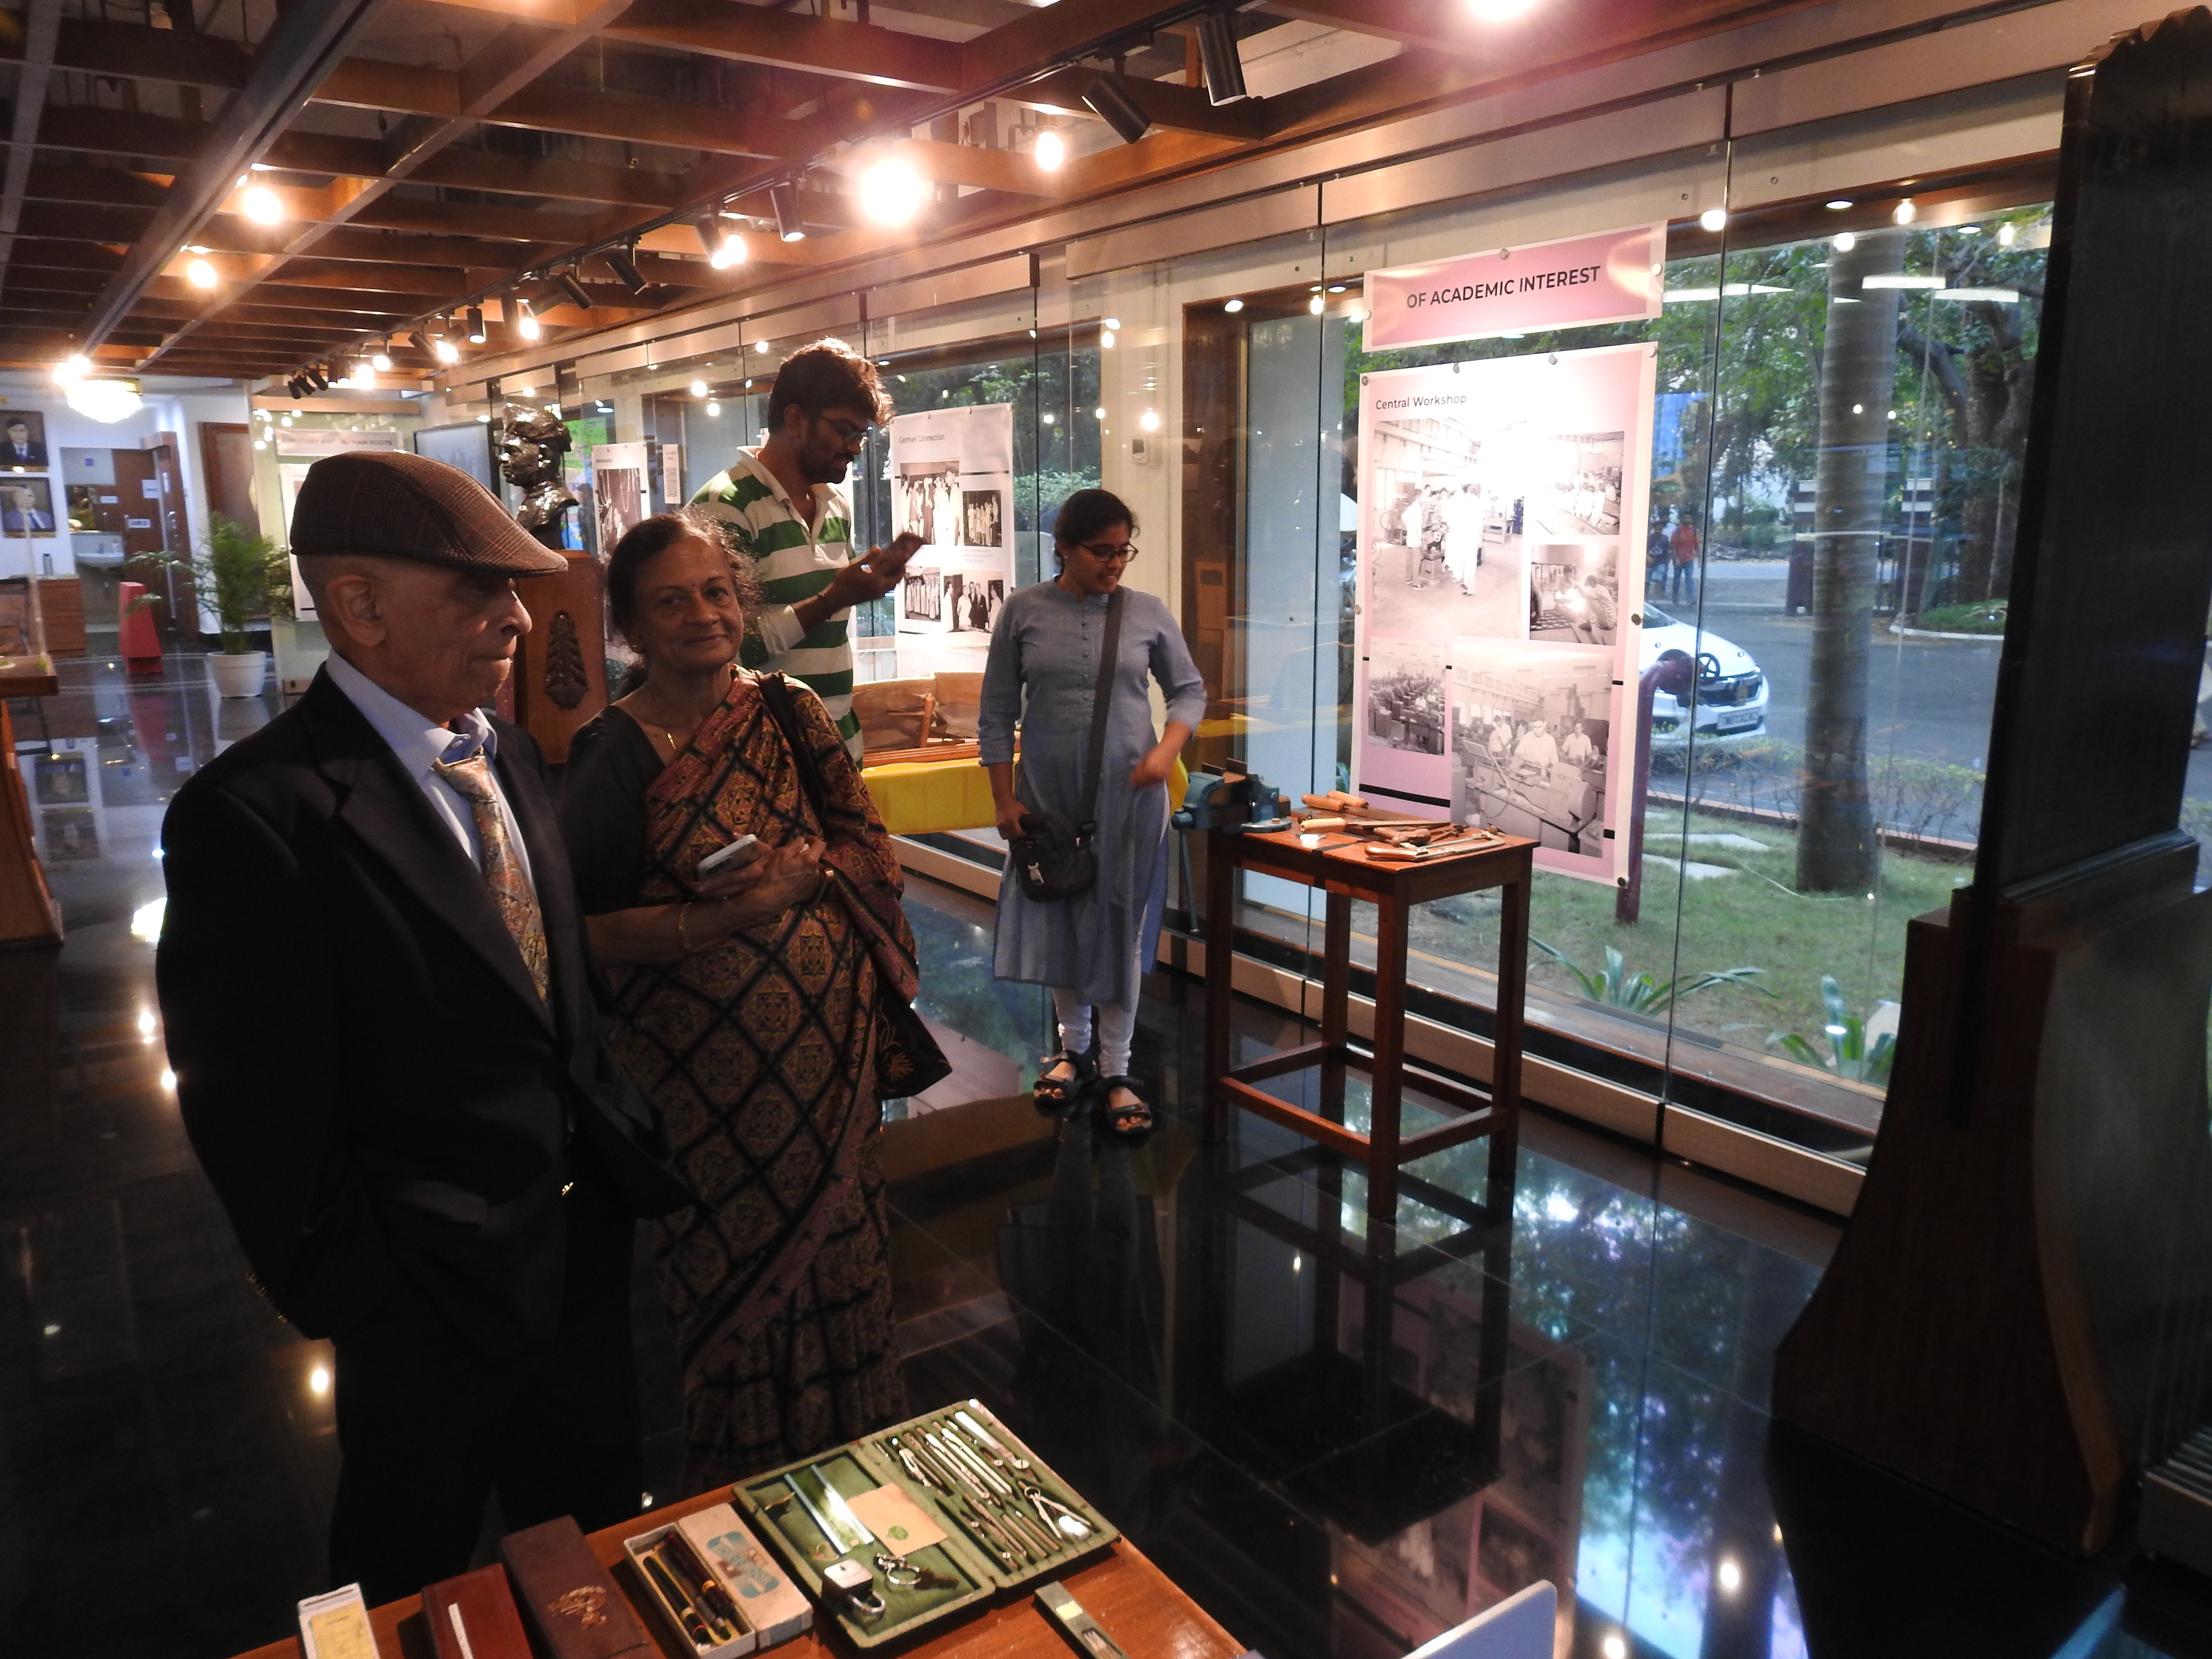 Mr. S. S. Mani Venkata and Mrs. Padma view exhibits at the Heritage Centre